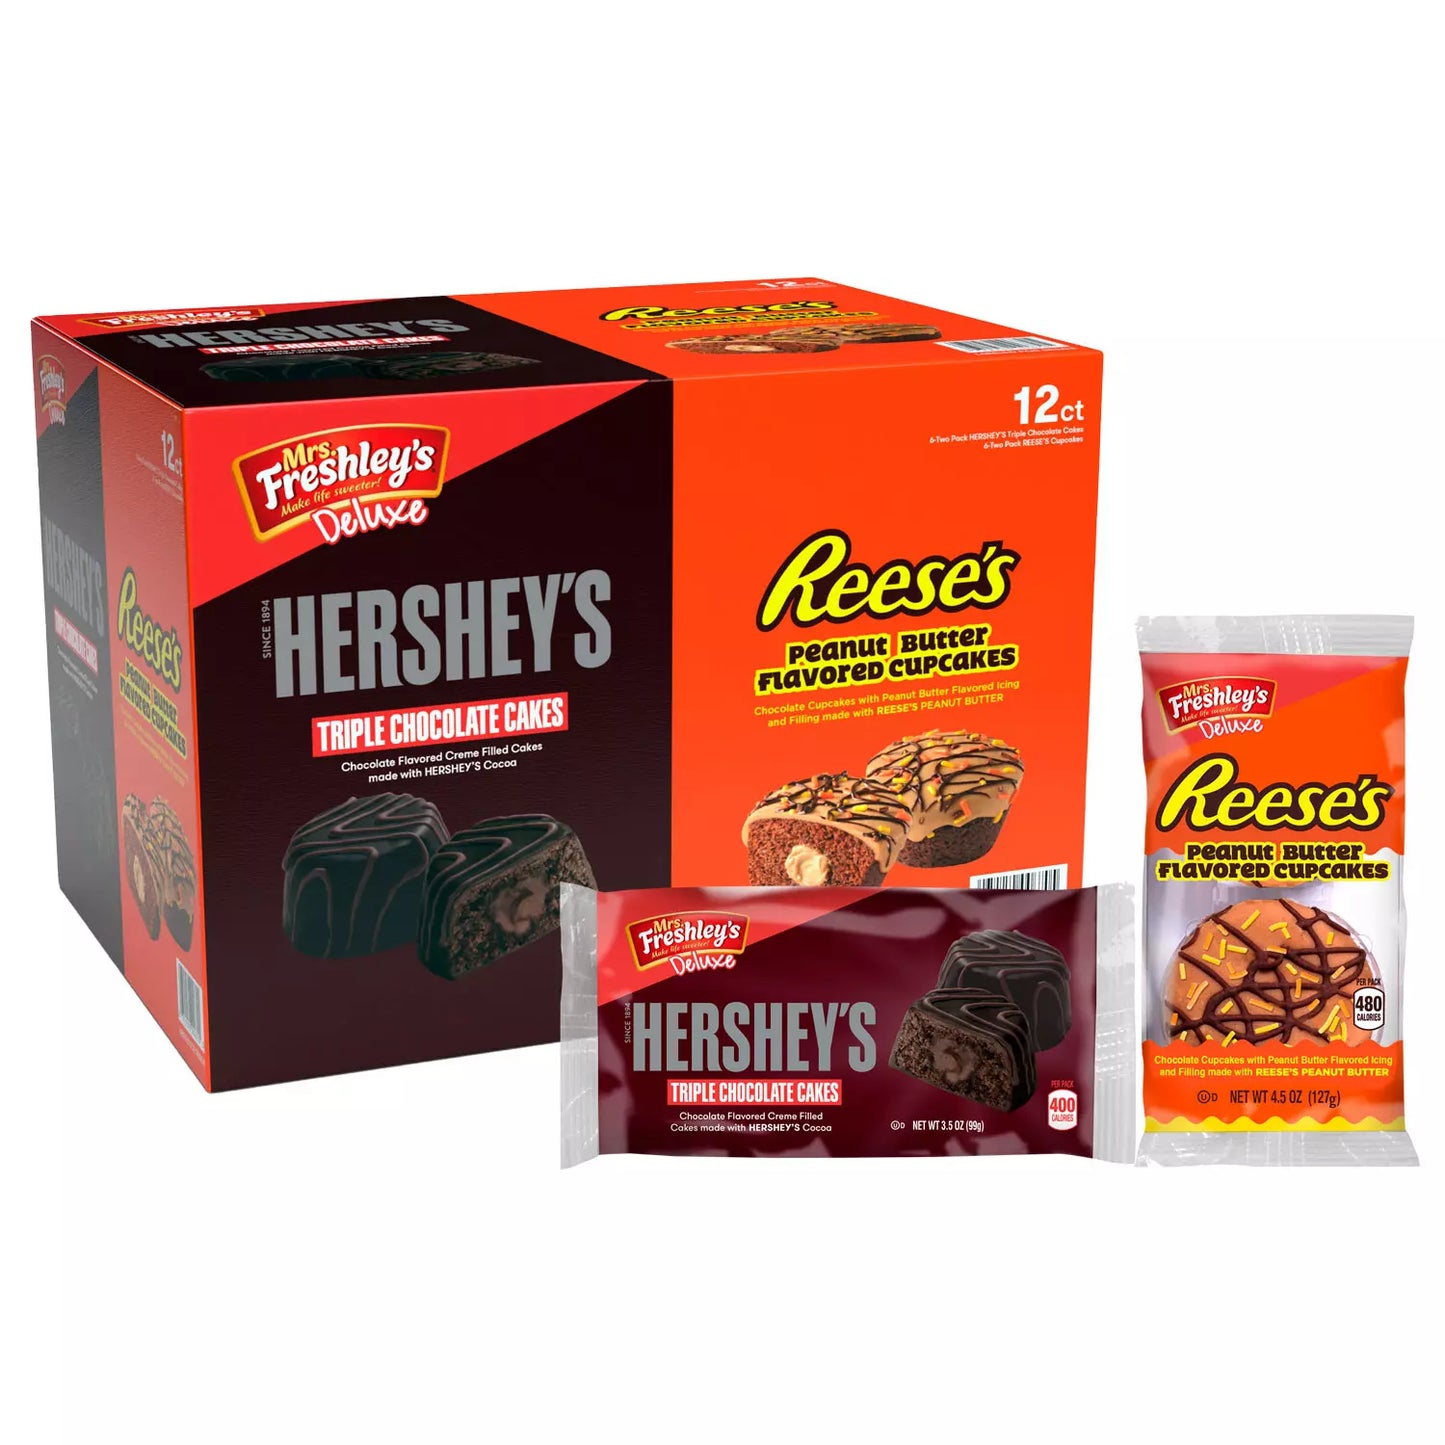 Mrs. Freshley's Deluxe Cupcakes Variety Pack (48 oz.) 12 Pack - Hershey's Triple Chocolate CakesReese's Peanut Butter Flavored Cupcakes - OOS